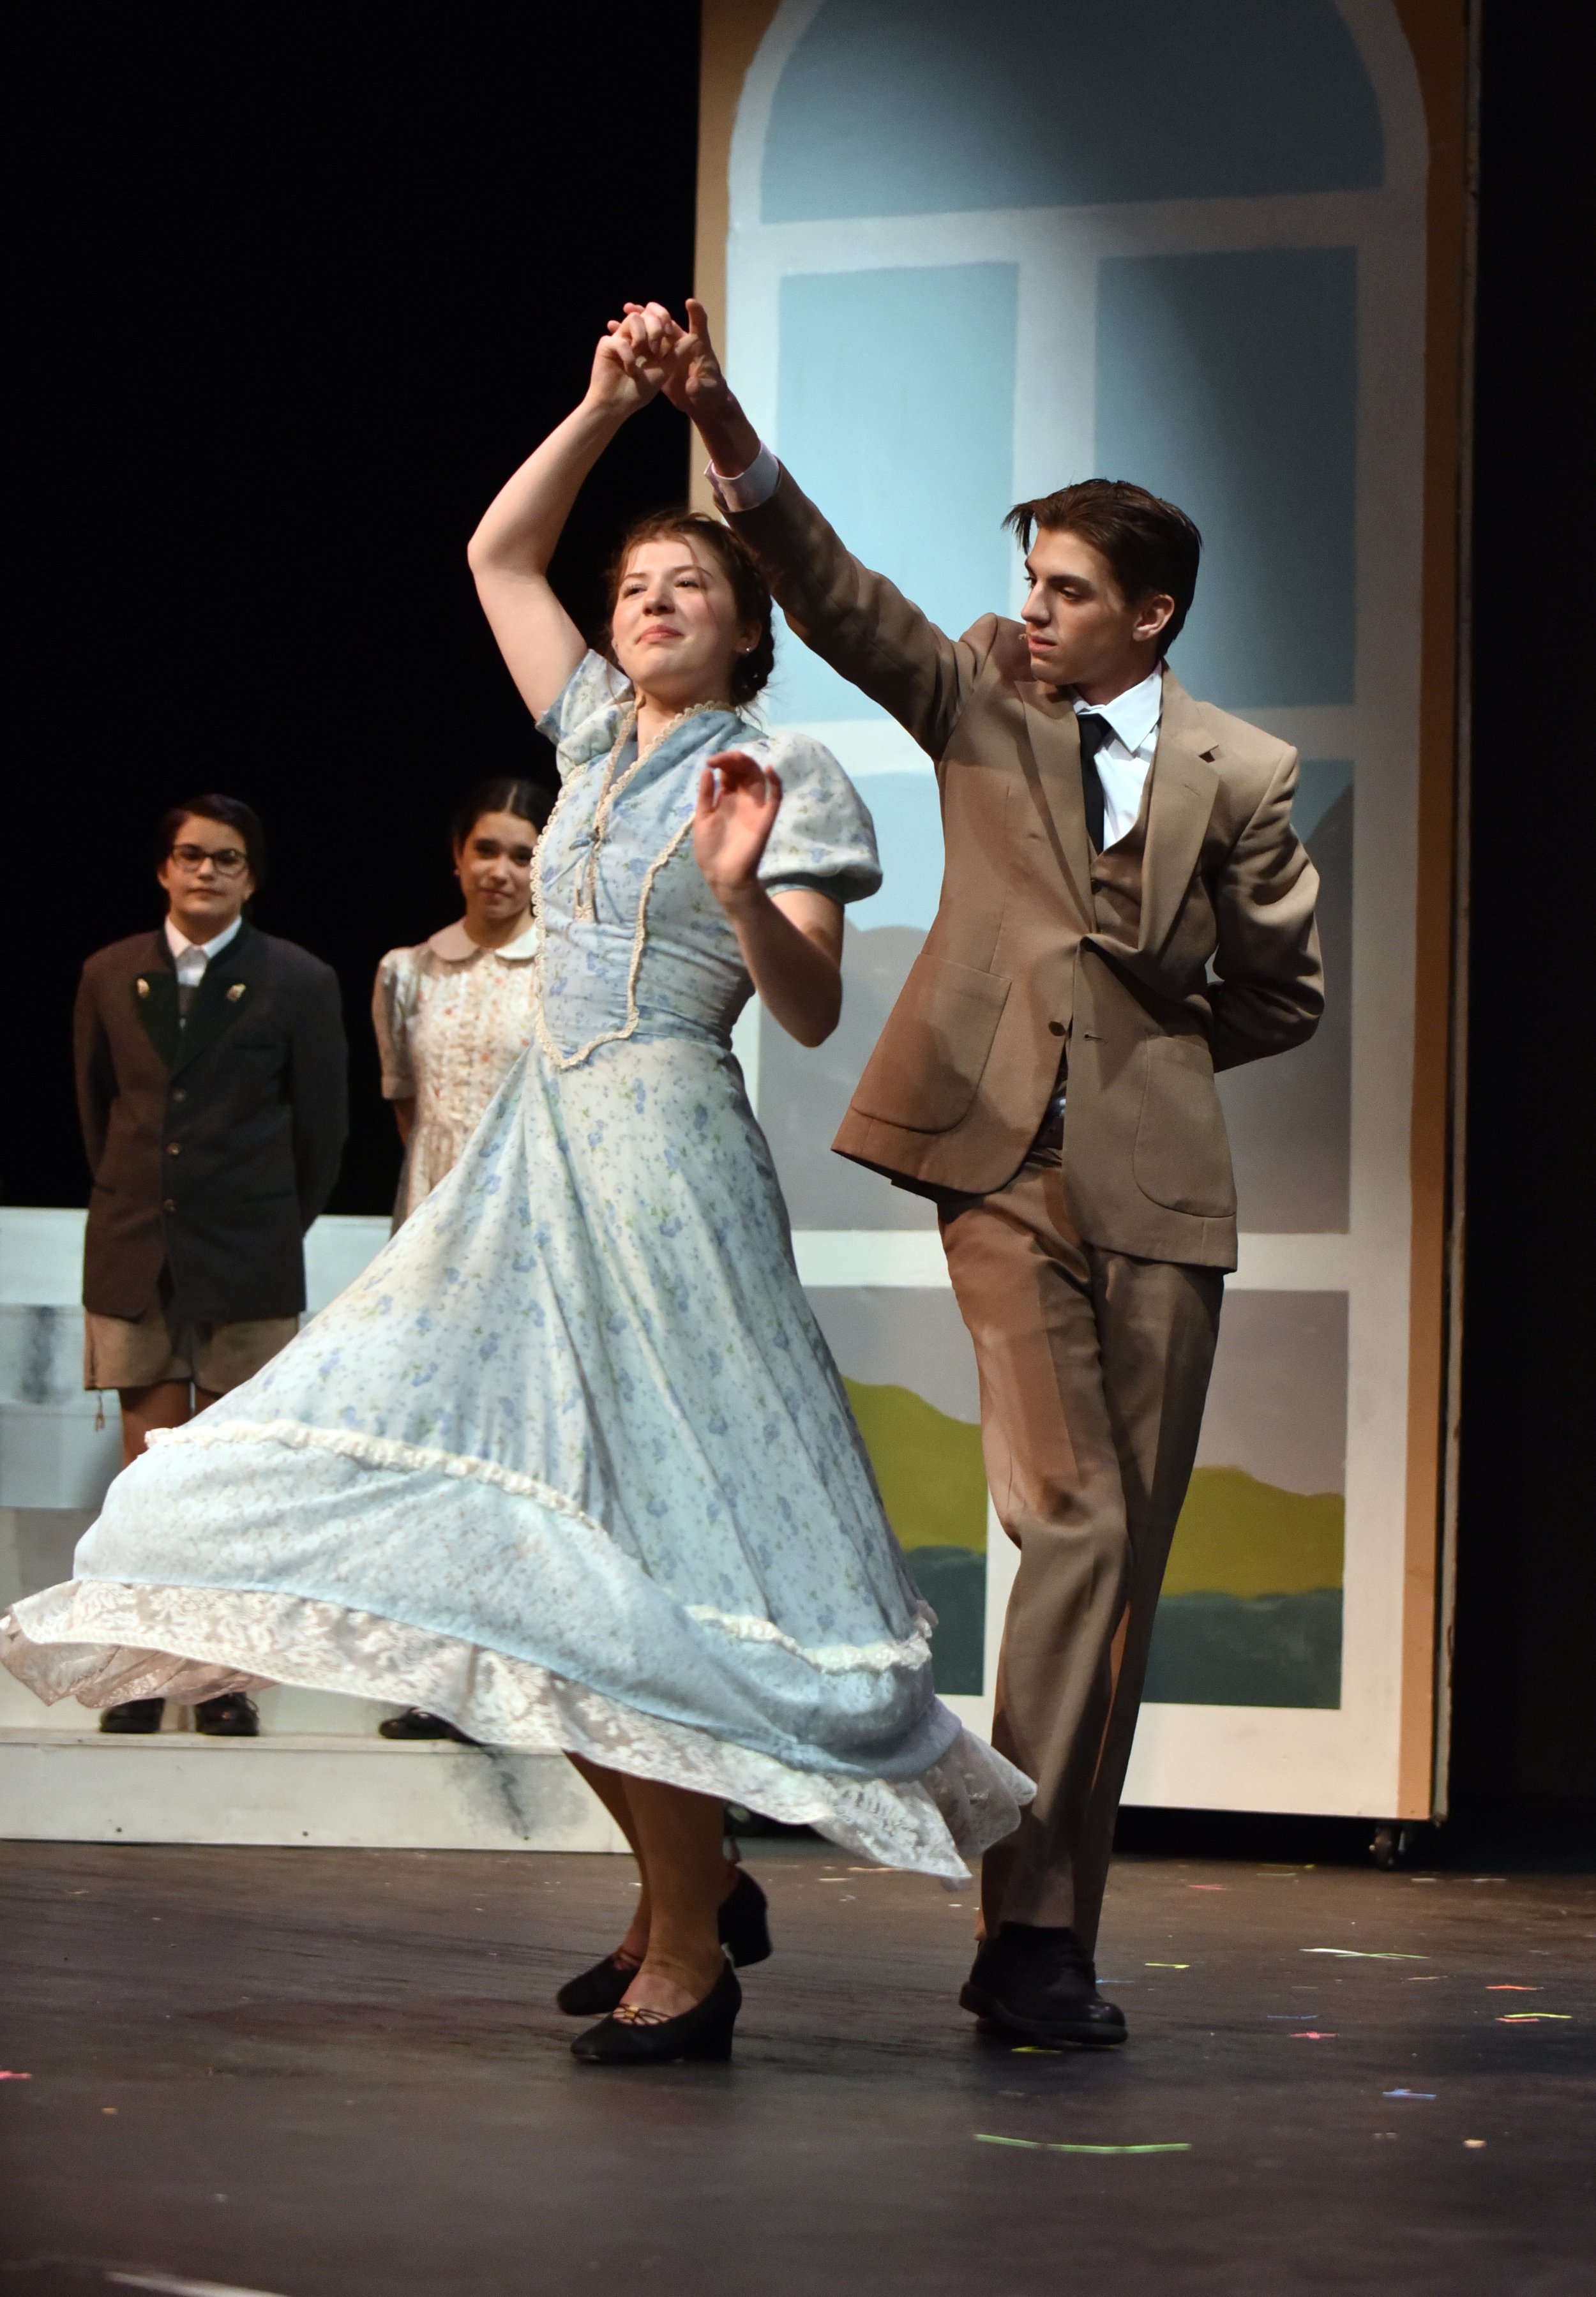  Maria (Abby Holter) and the captain (Christopher Cummiskey) share a dance. Photo by Gordon Miller 